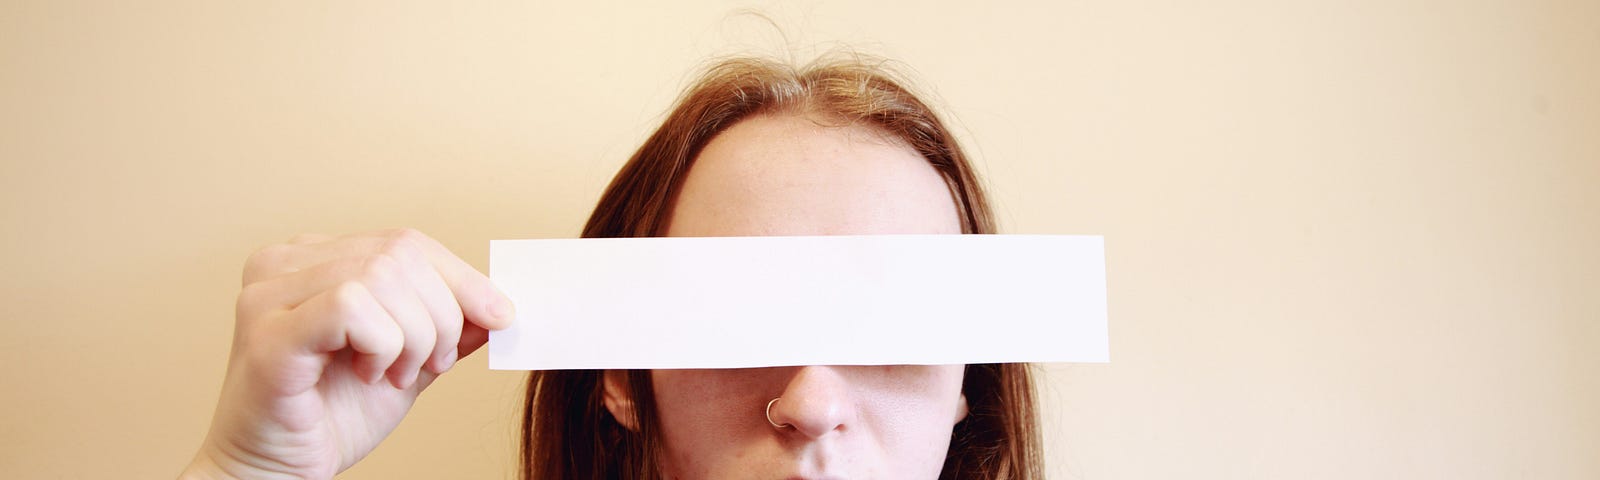 Woman wearing red shirt covers her eyes with a plain white paper.